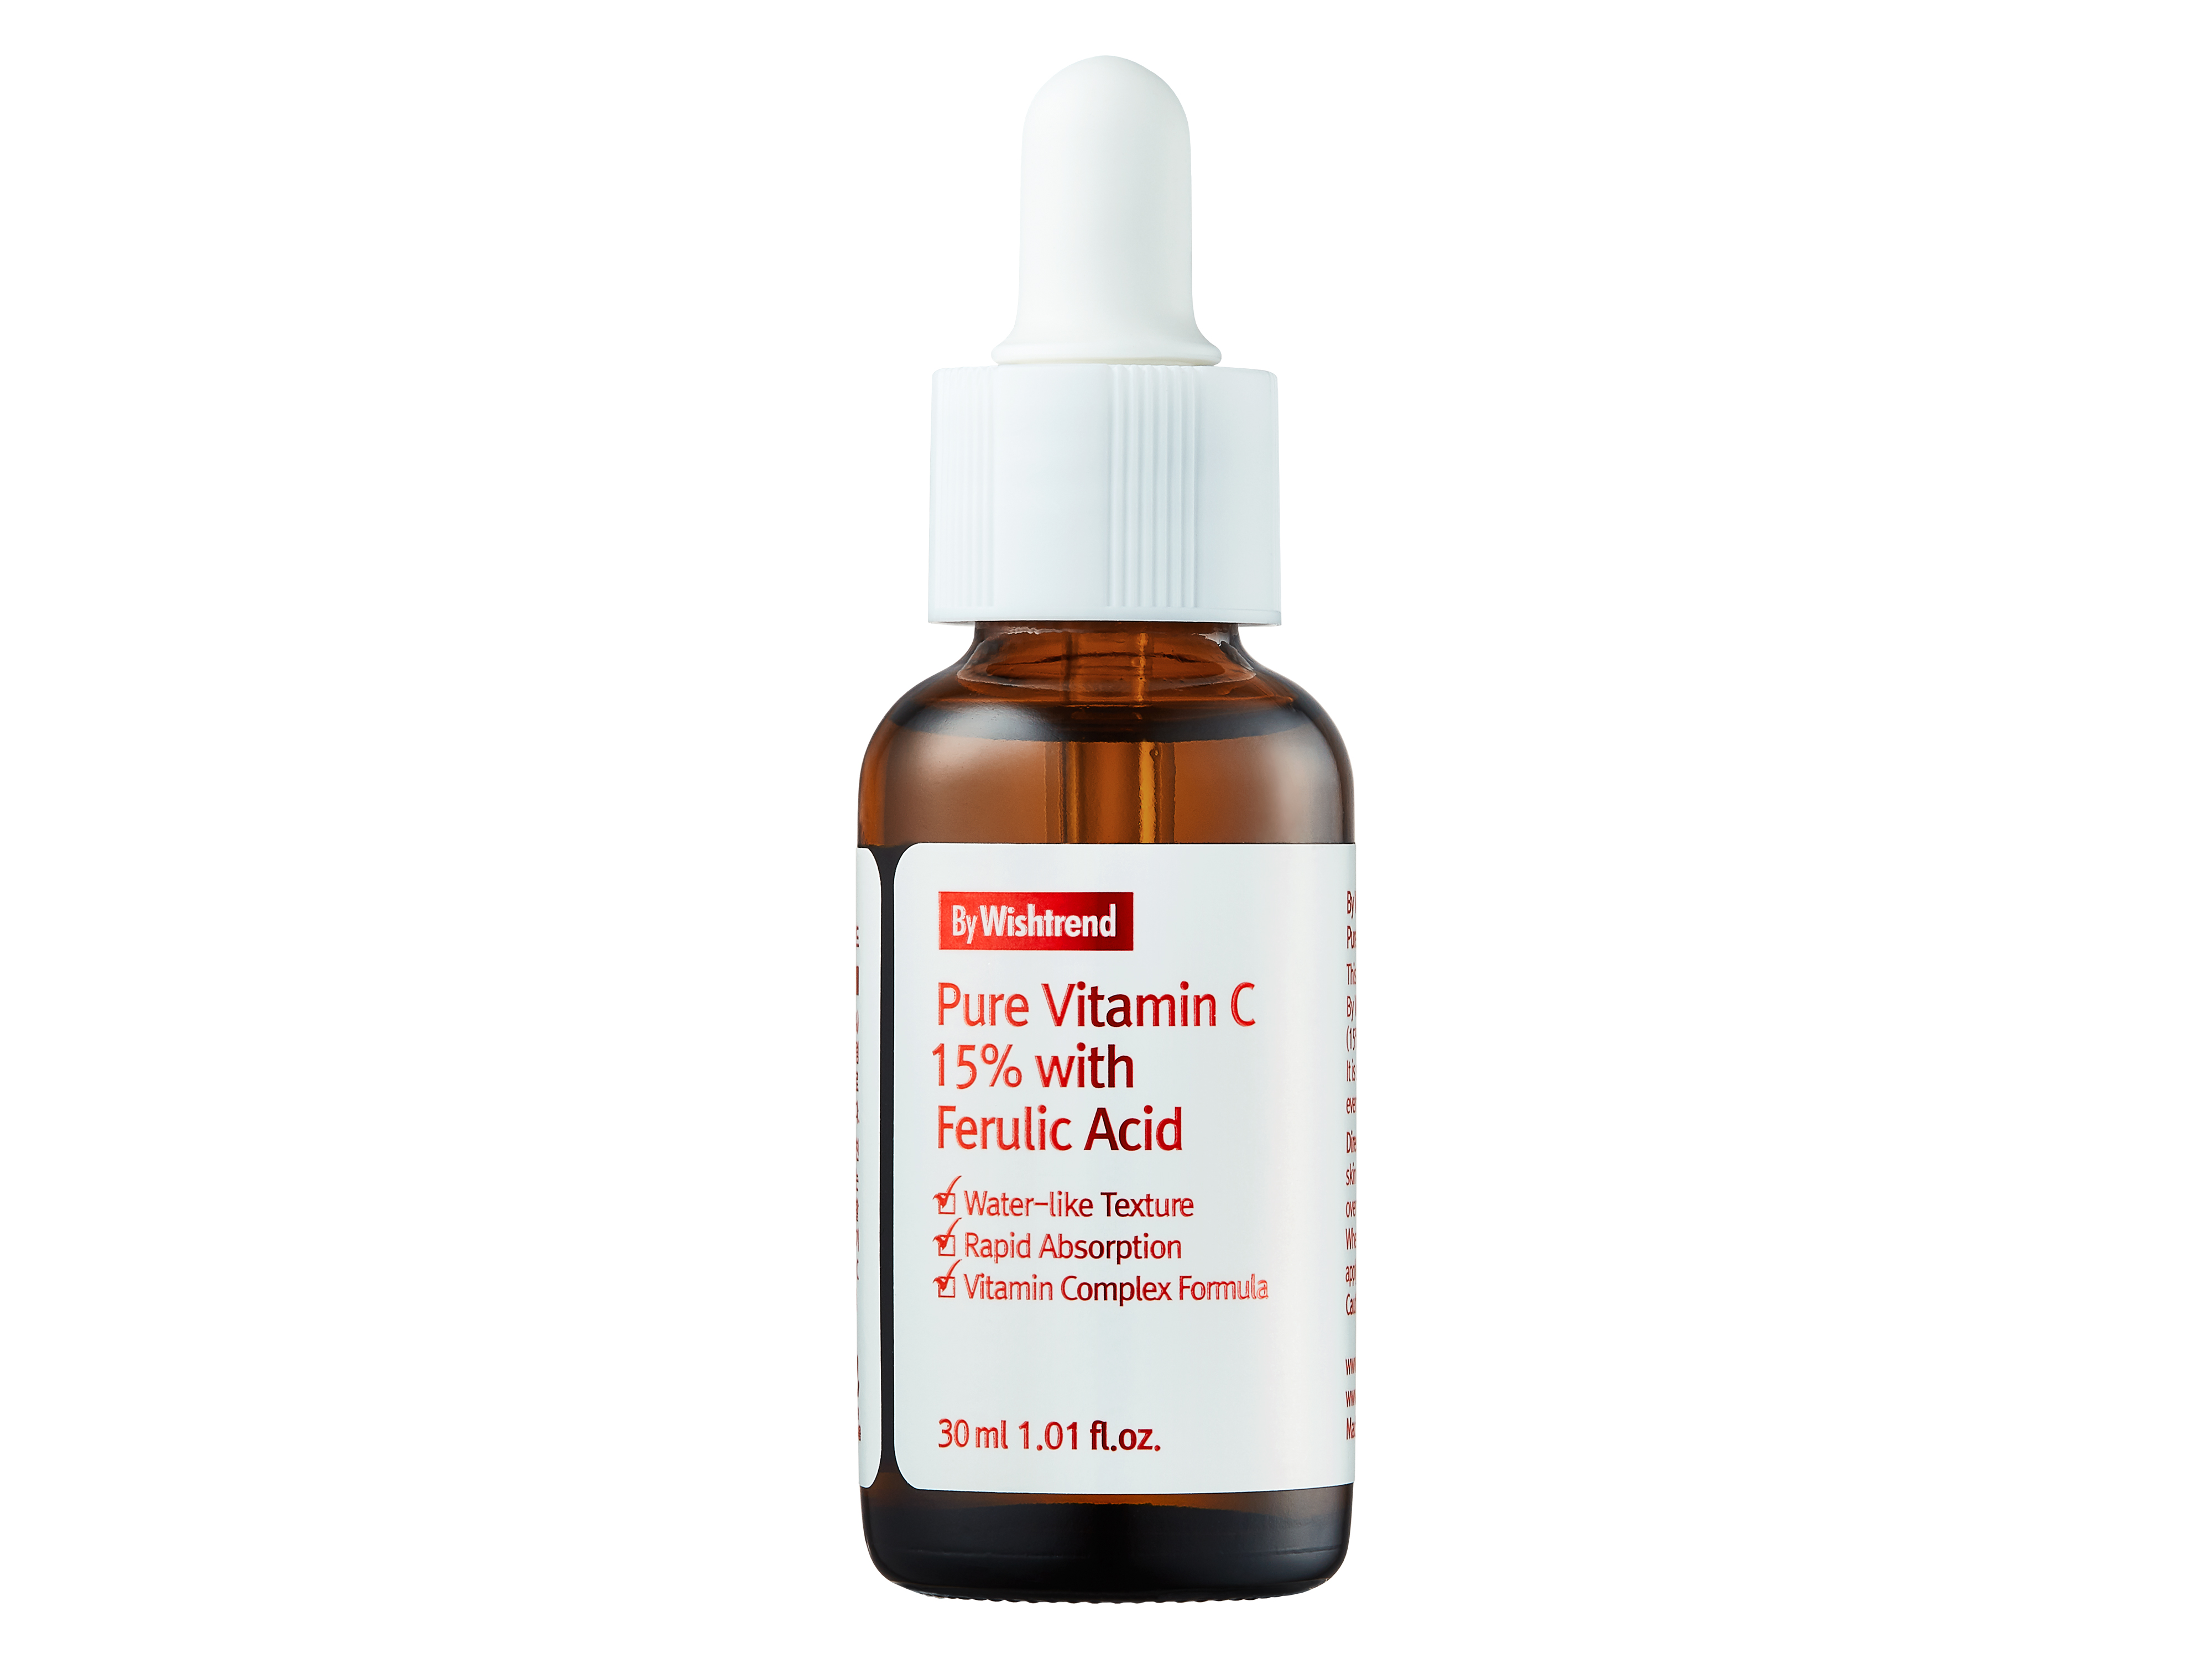 By Wishtrend ByWishtrend Pure Vitamin C 15% with Ferulic Acid, 30